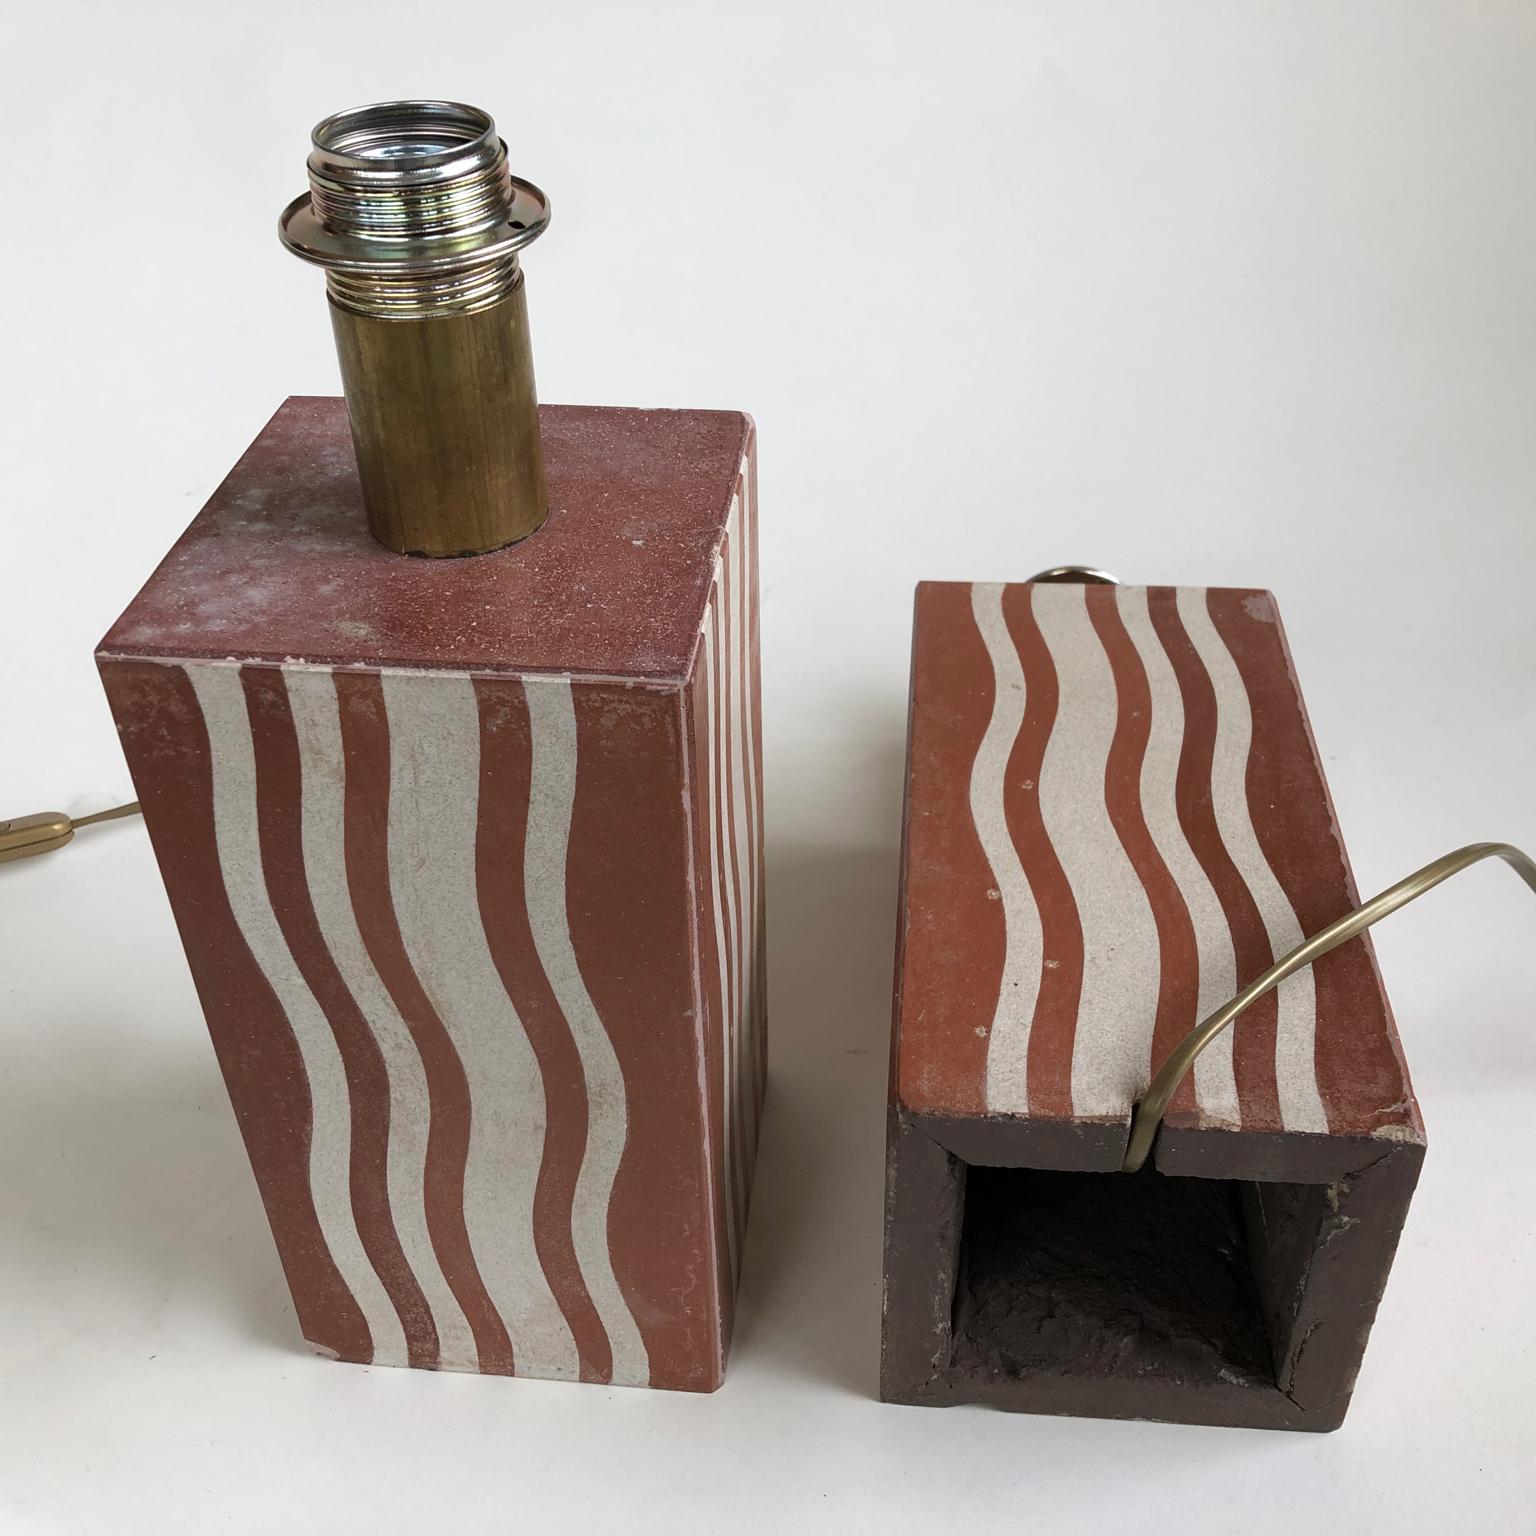 Terracotta Pair of Table Lamps with 1930s Reclaimed Art Deco Tiles, Off-White and Brick